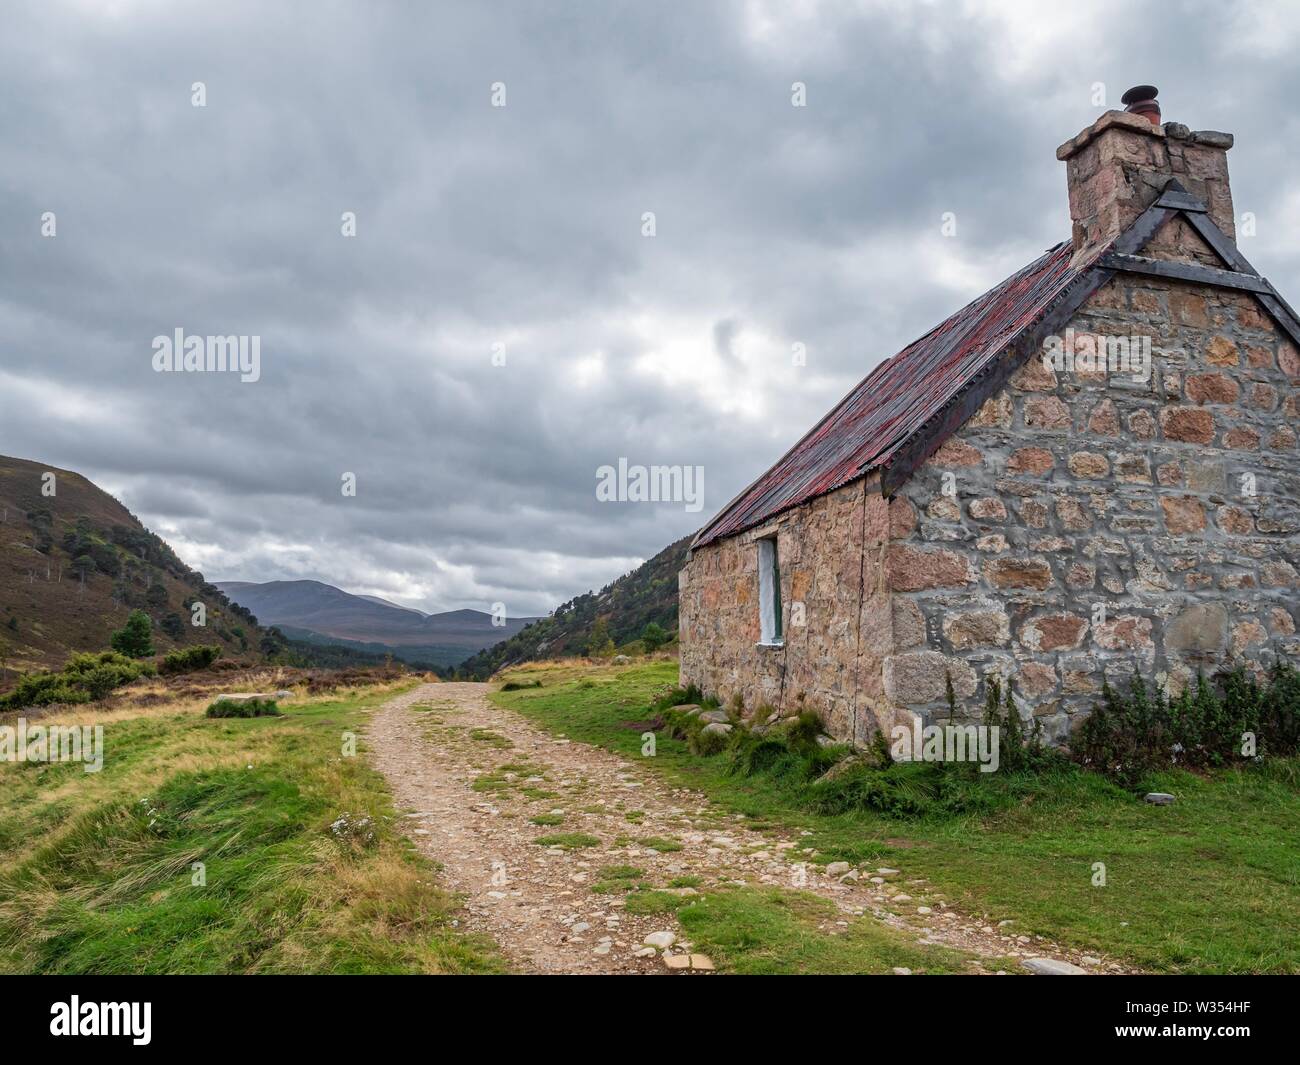 A mountain bothy in the highlands of Scotland on a cloudy, stormy day Stock Photo